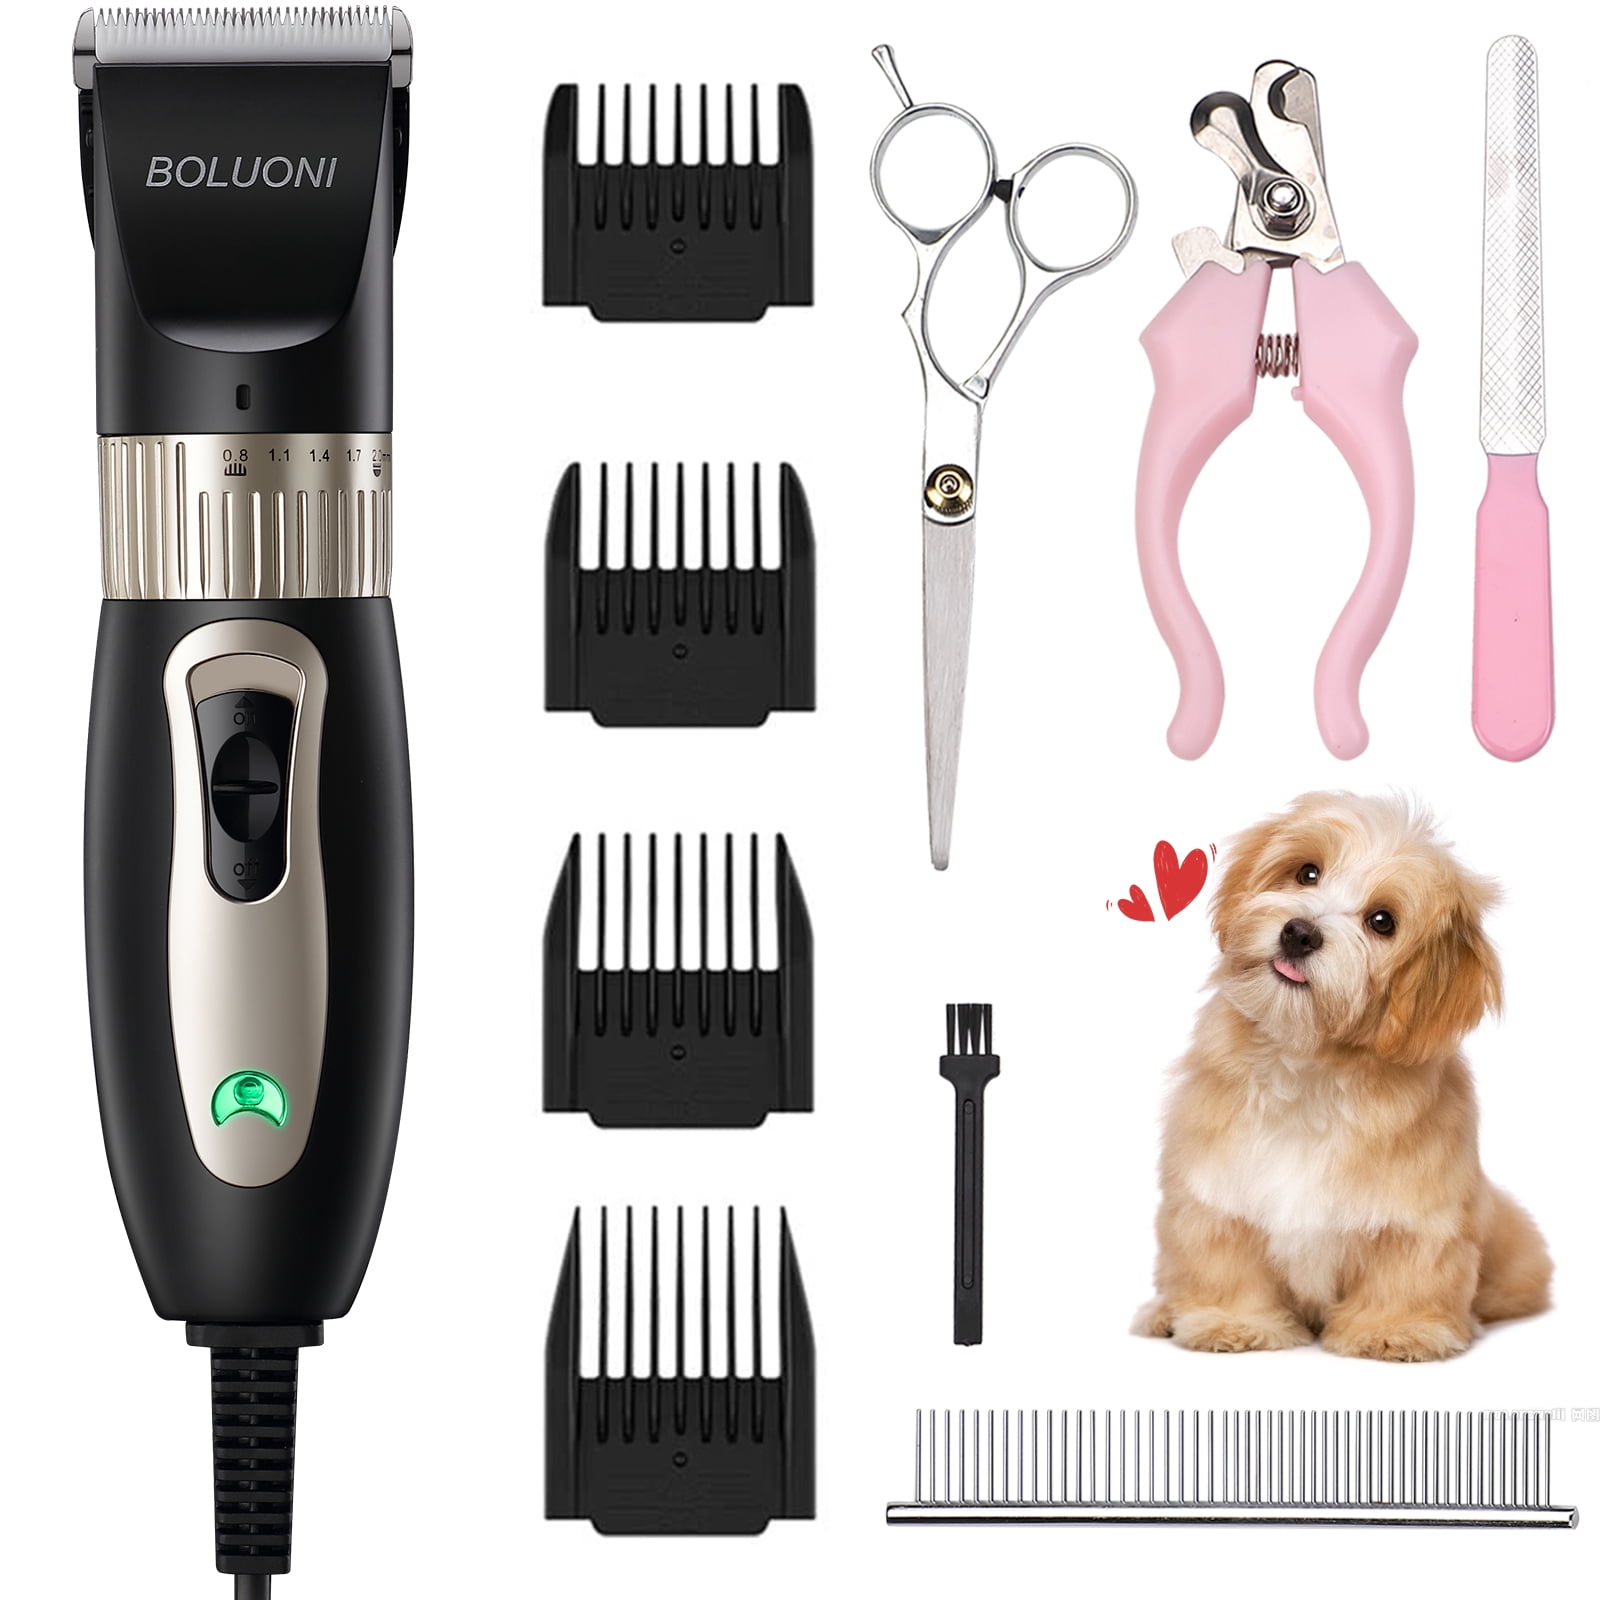 BOLUONI Dog Shaver Clippers Professional Dog Grooming Clippers Low Noise Pet Clippers Electric Quiet Hair Clippers with 4 Guard Combs for Dogs Cats Pets 